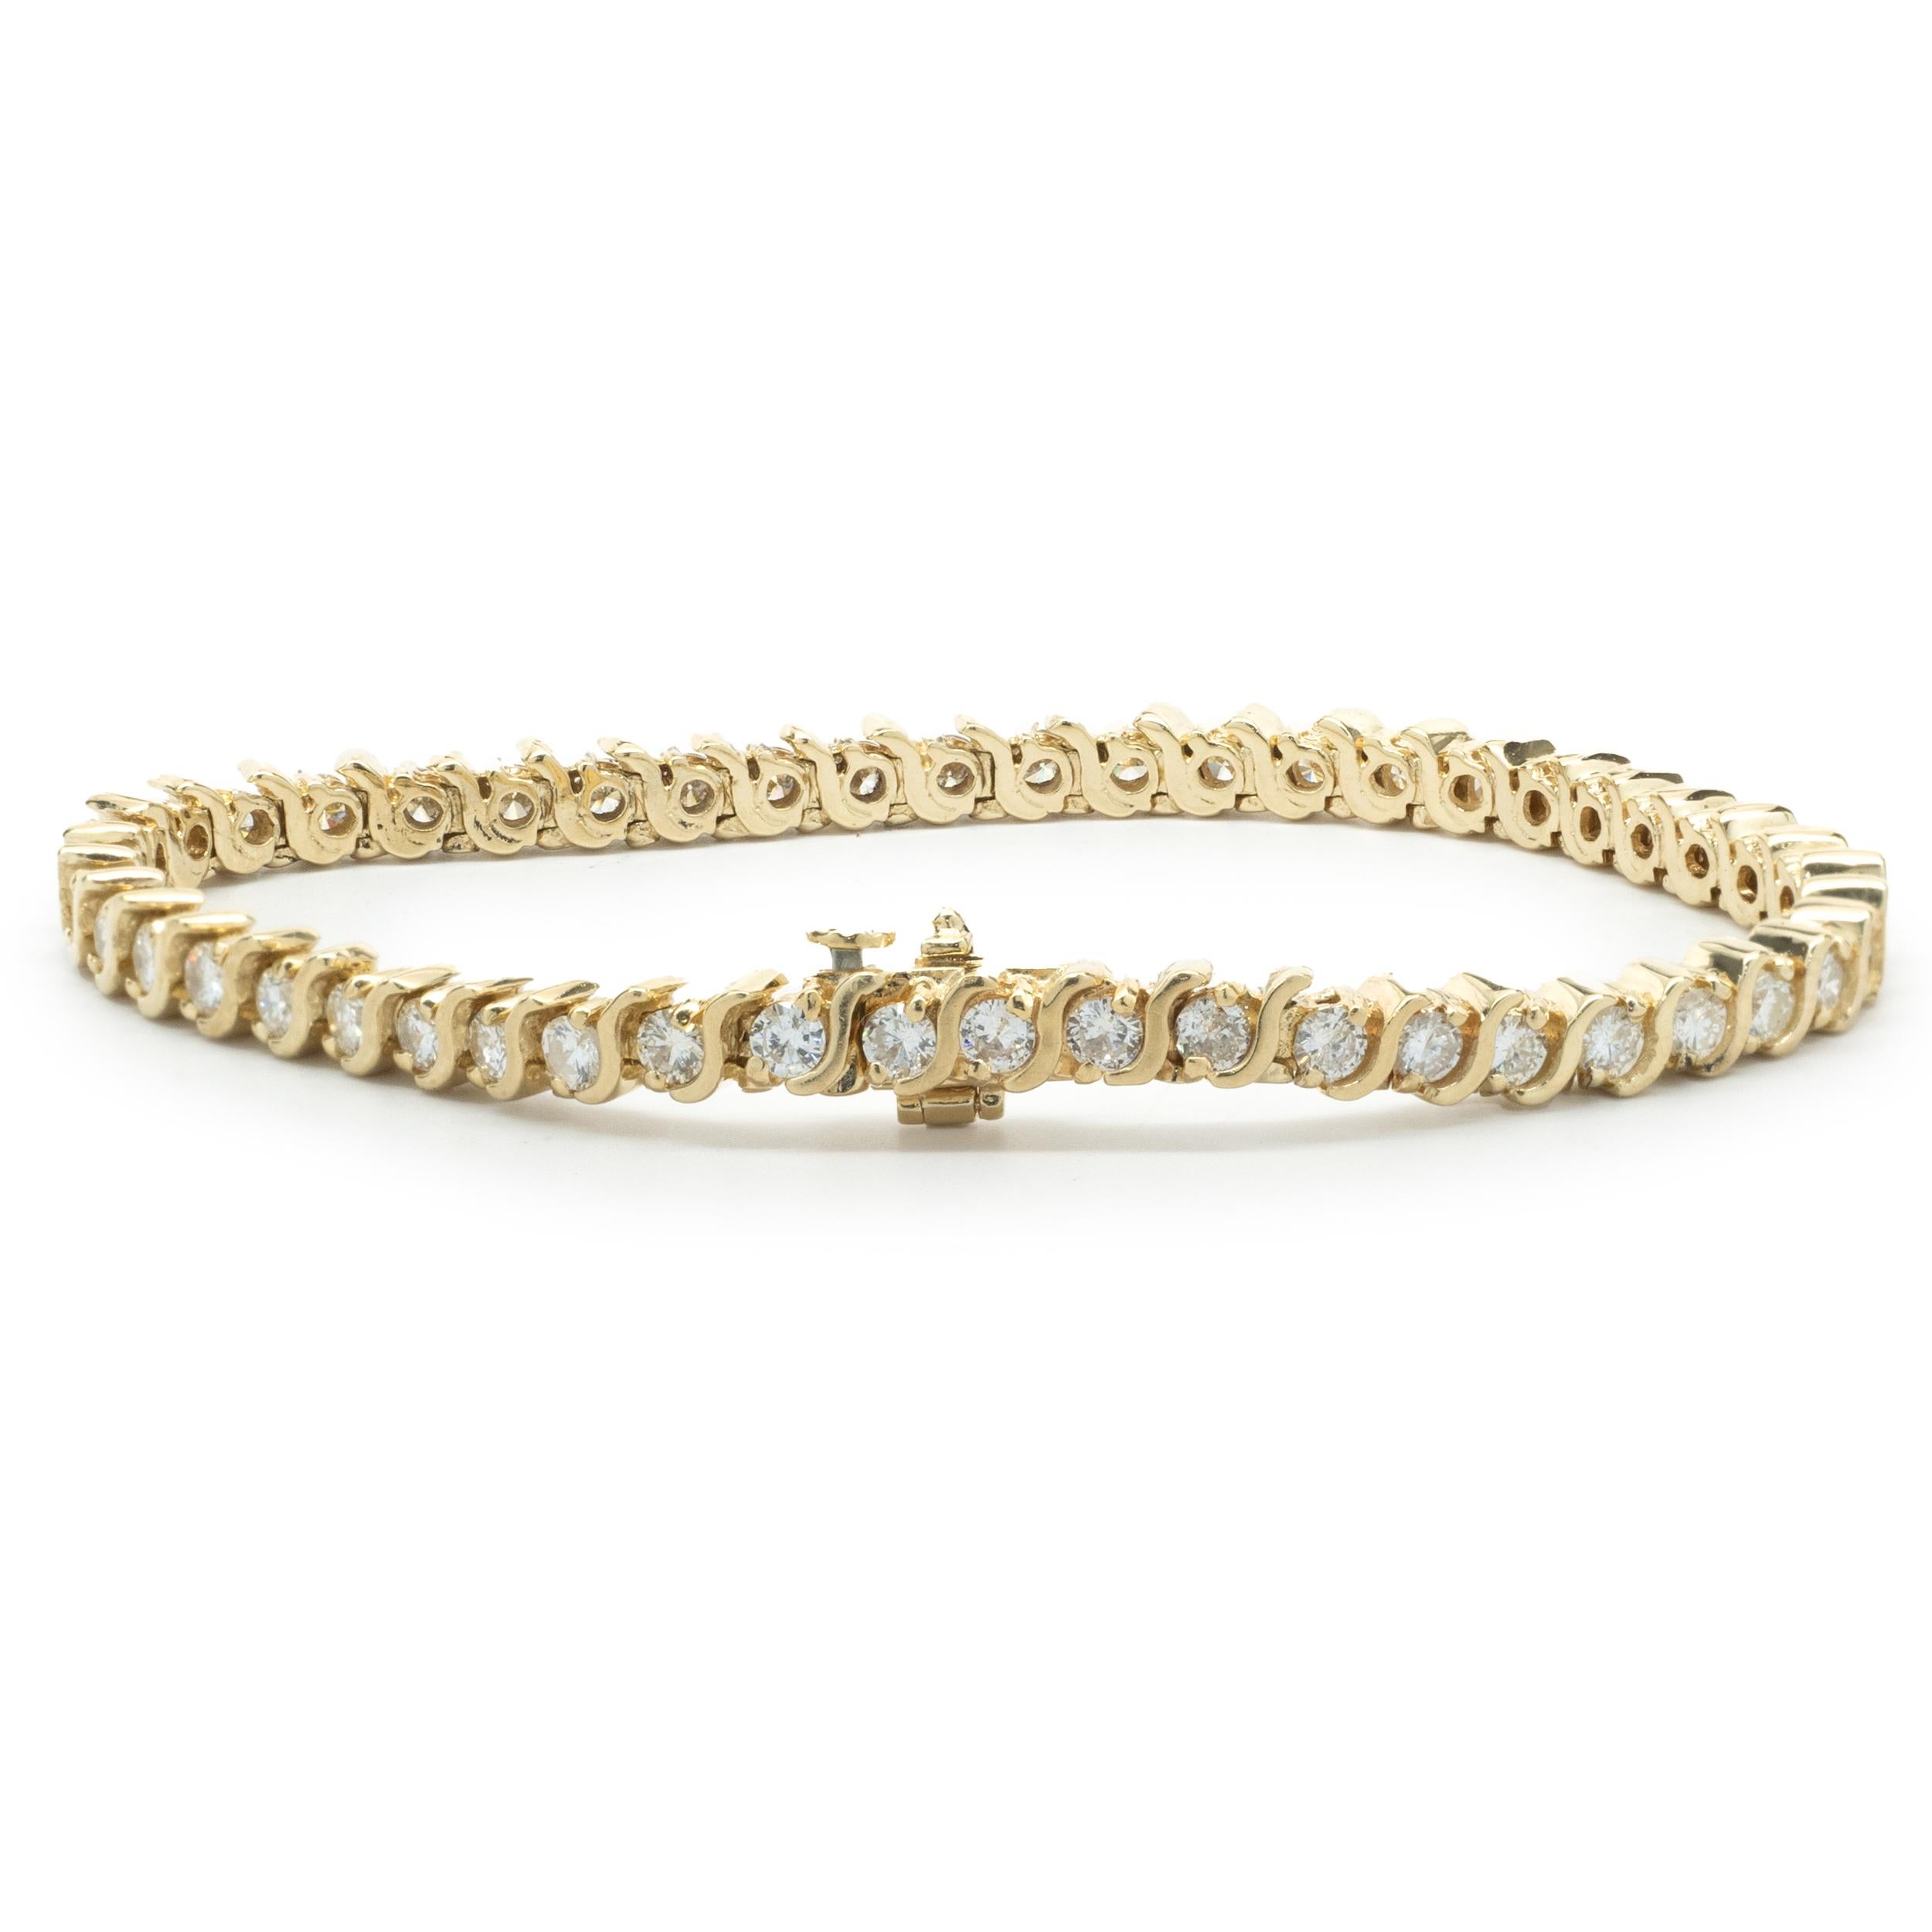 Designer: custom
Material: 14K yellow gold
Diamond: 48 round brilliant= 3.36cttw
Color: H
Clarity: SI1
Dimensions: bracelet will fit up to a 6.5-inch wrist
Weight: 15.15 grams
